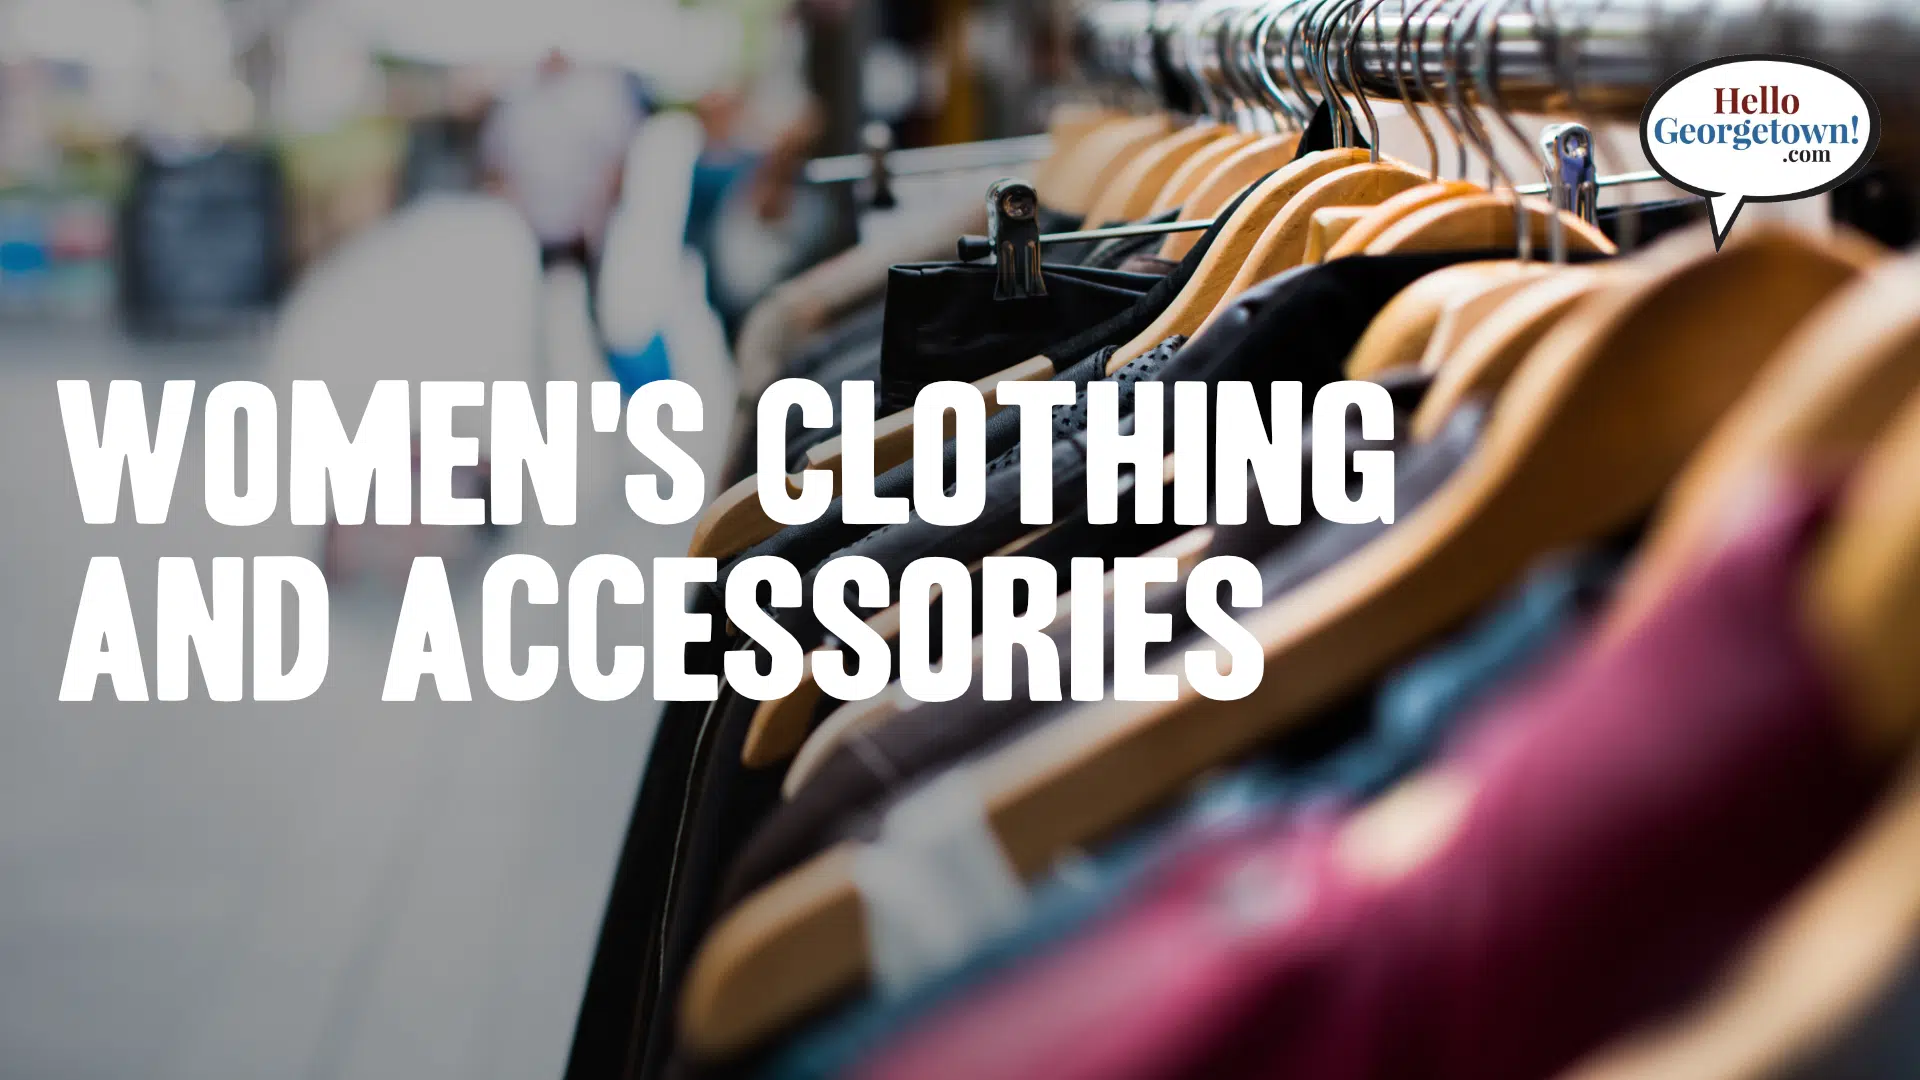 WOMEN'S CLOTHING AND ACCESSORIES